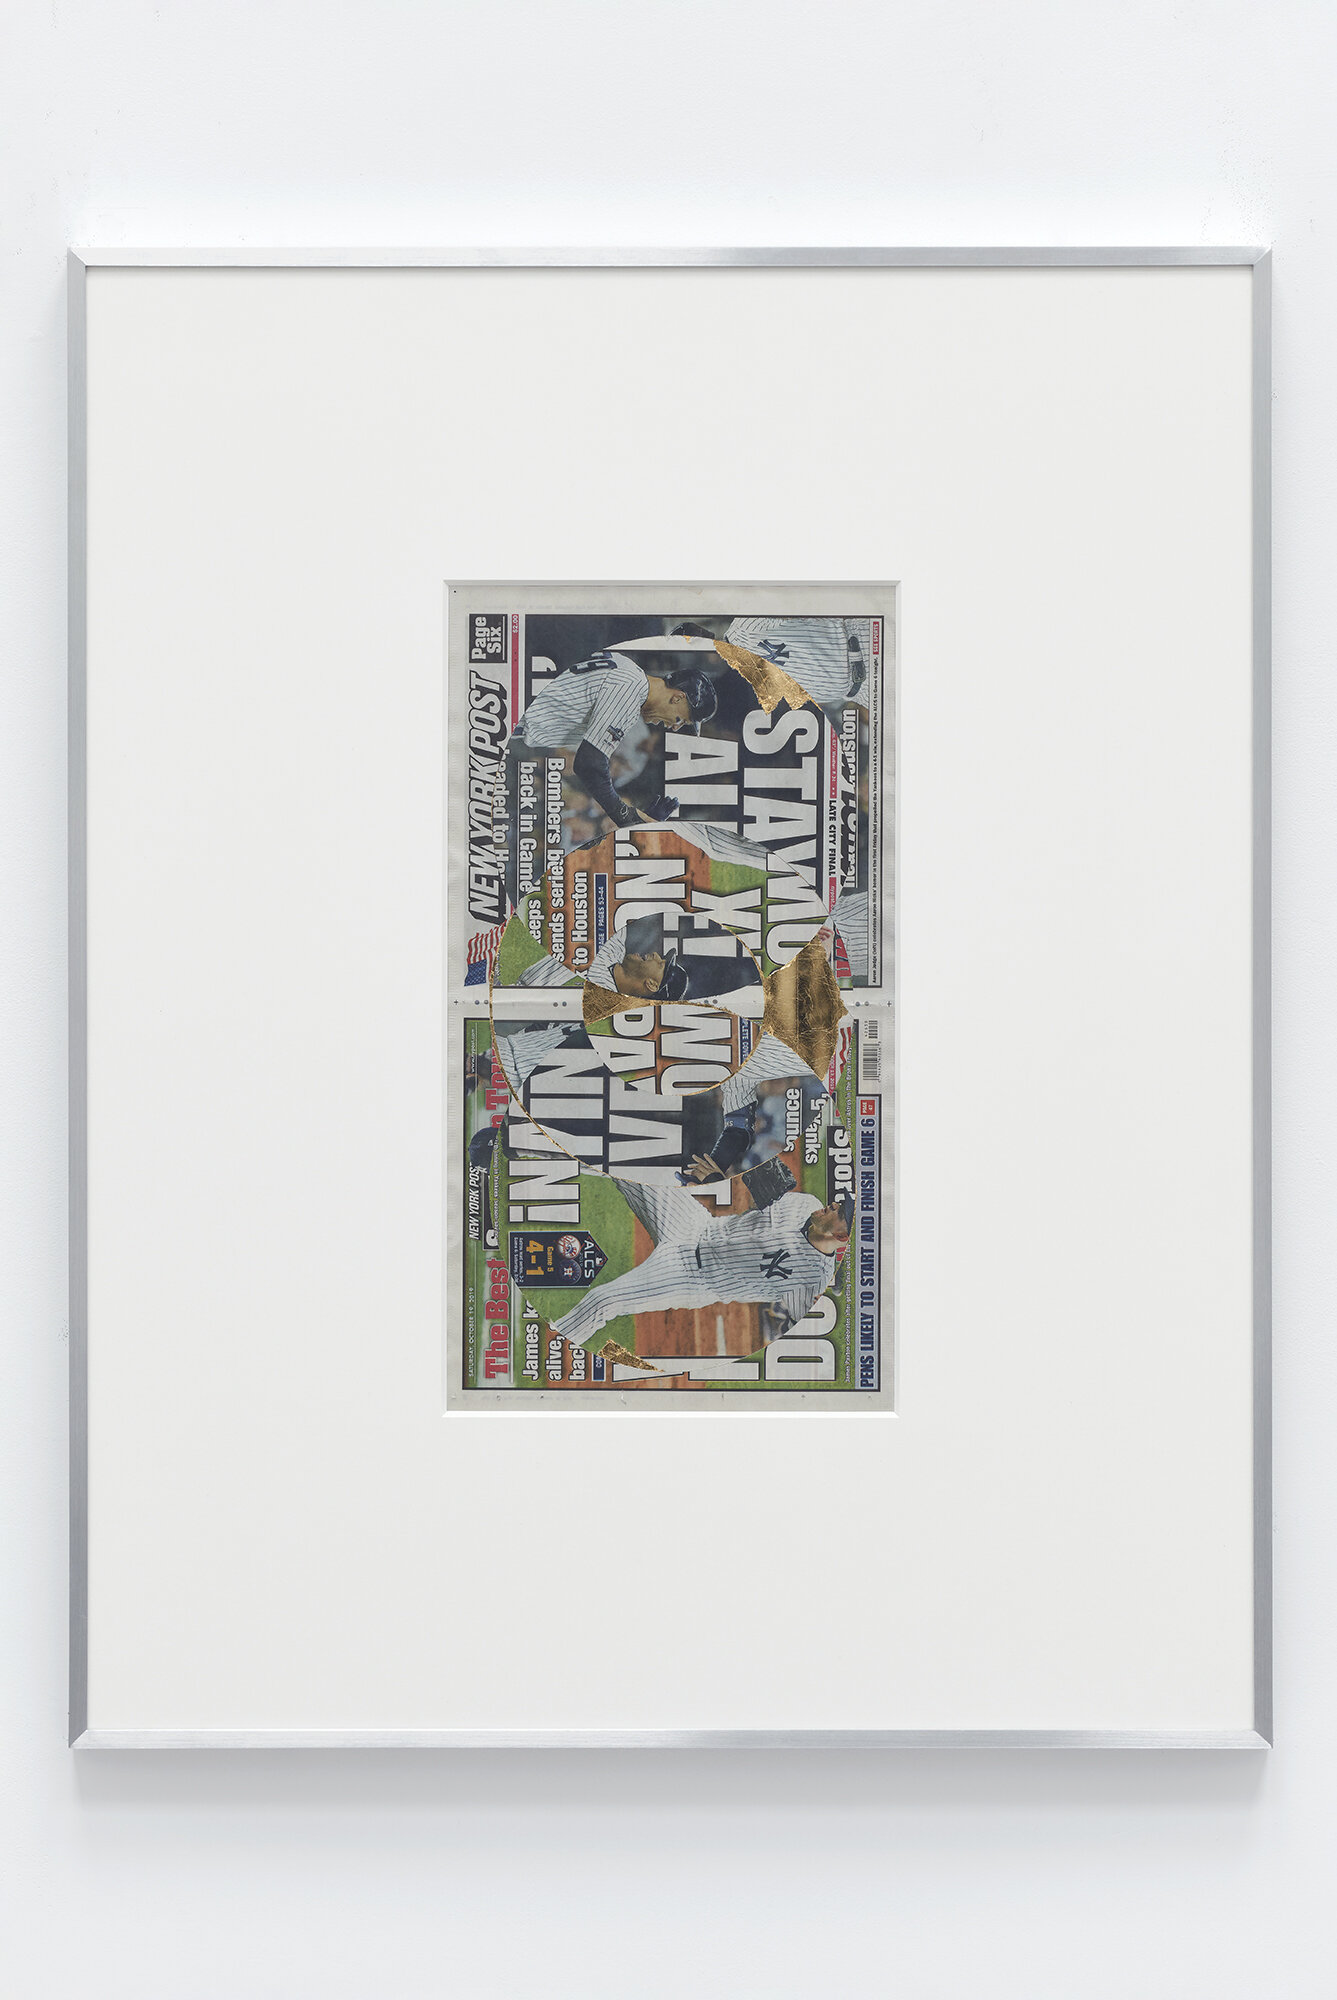   Blind Collage (Two 180º Rotations, New York Post, Saturday, October 19, 2019)    2019   Newspaper, tape, and 22 karat gold leaf  39 1/8 x 31 1/4 inches  Exhibition:  Abstract of a Partial Disassembling of an Invention without a Future … , 2019    